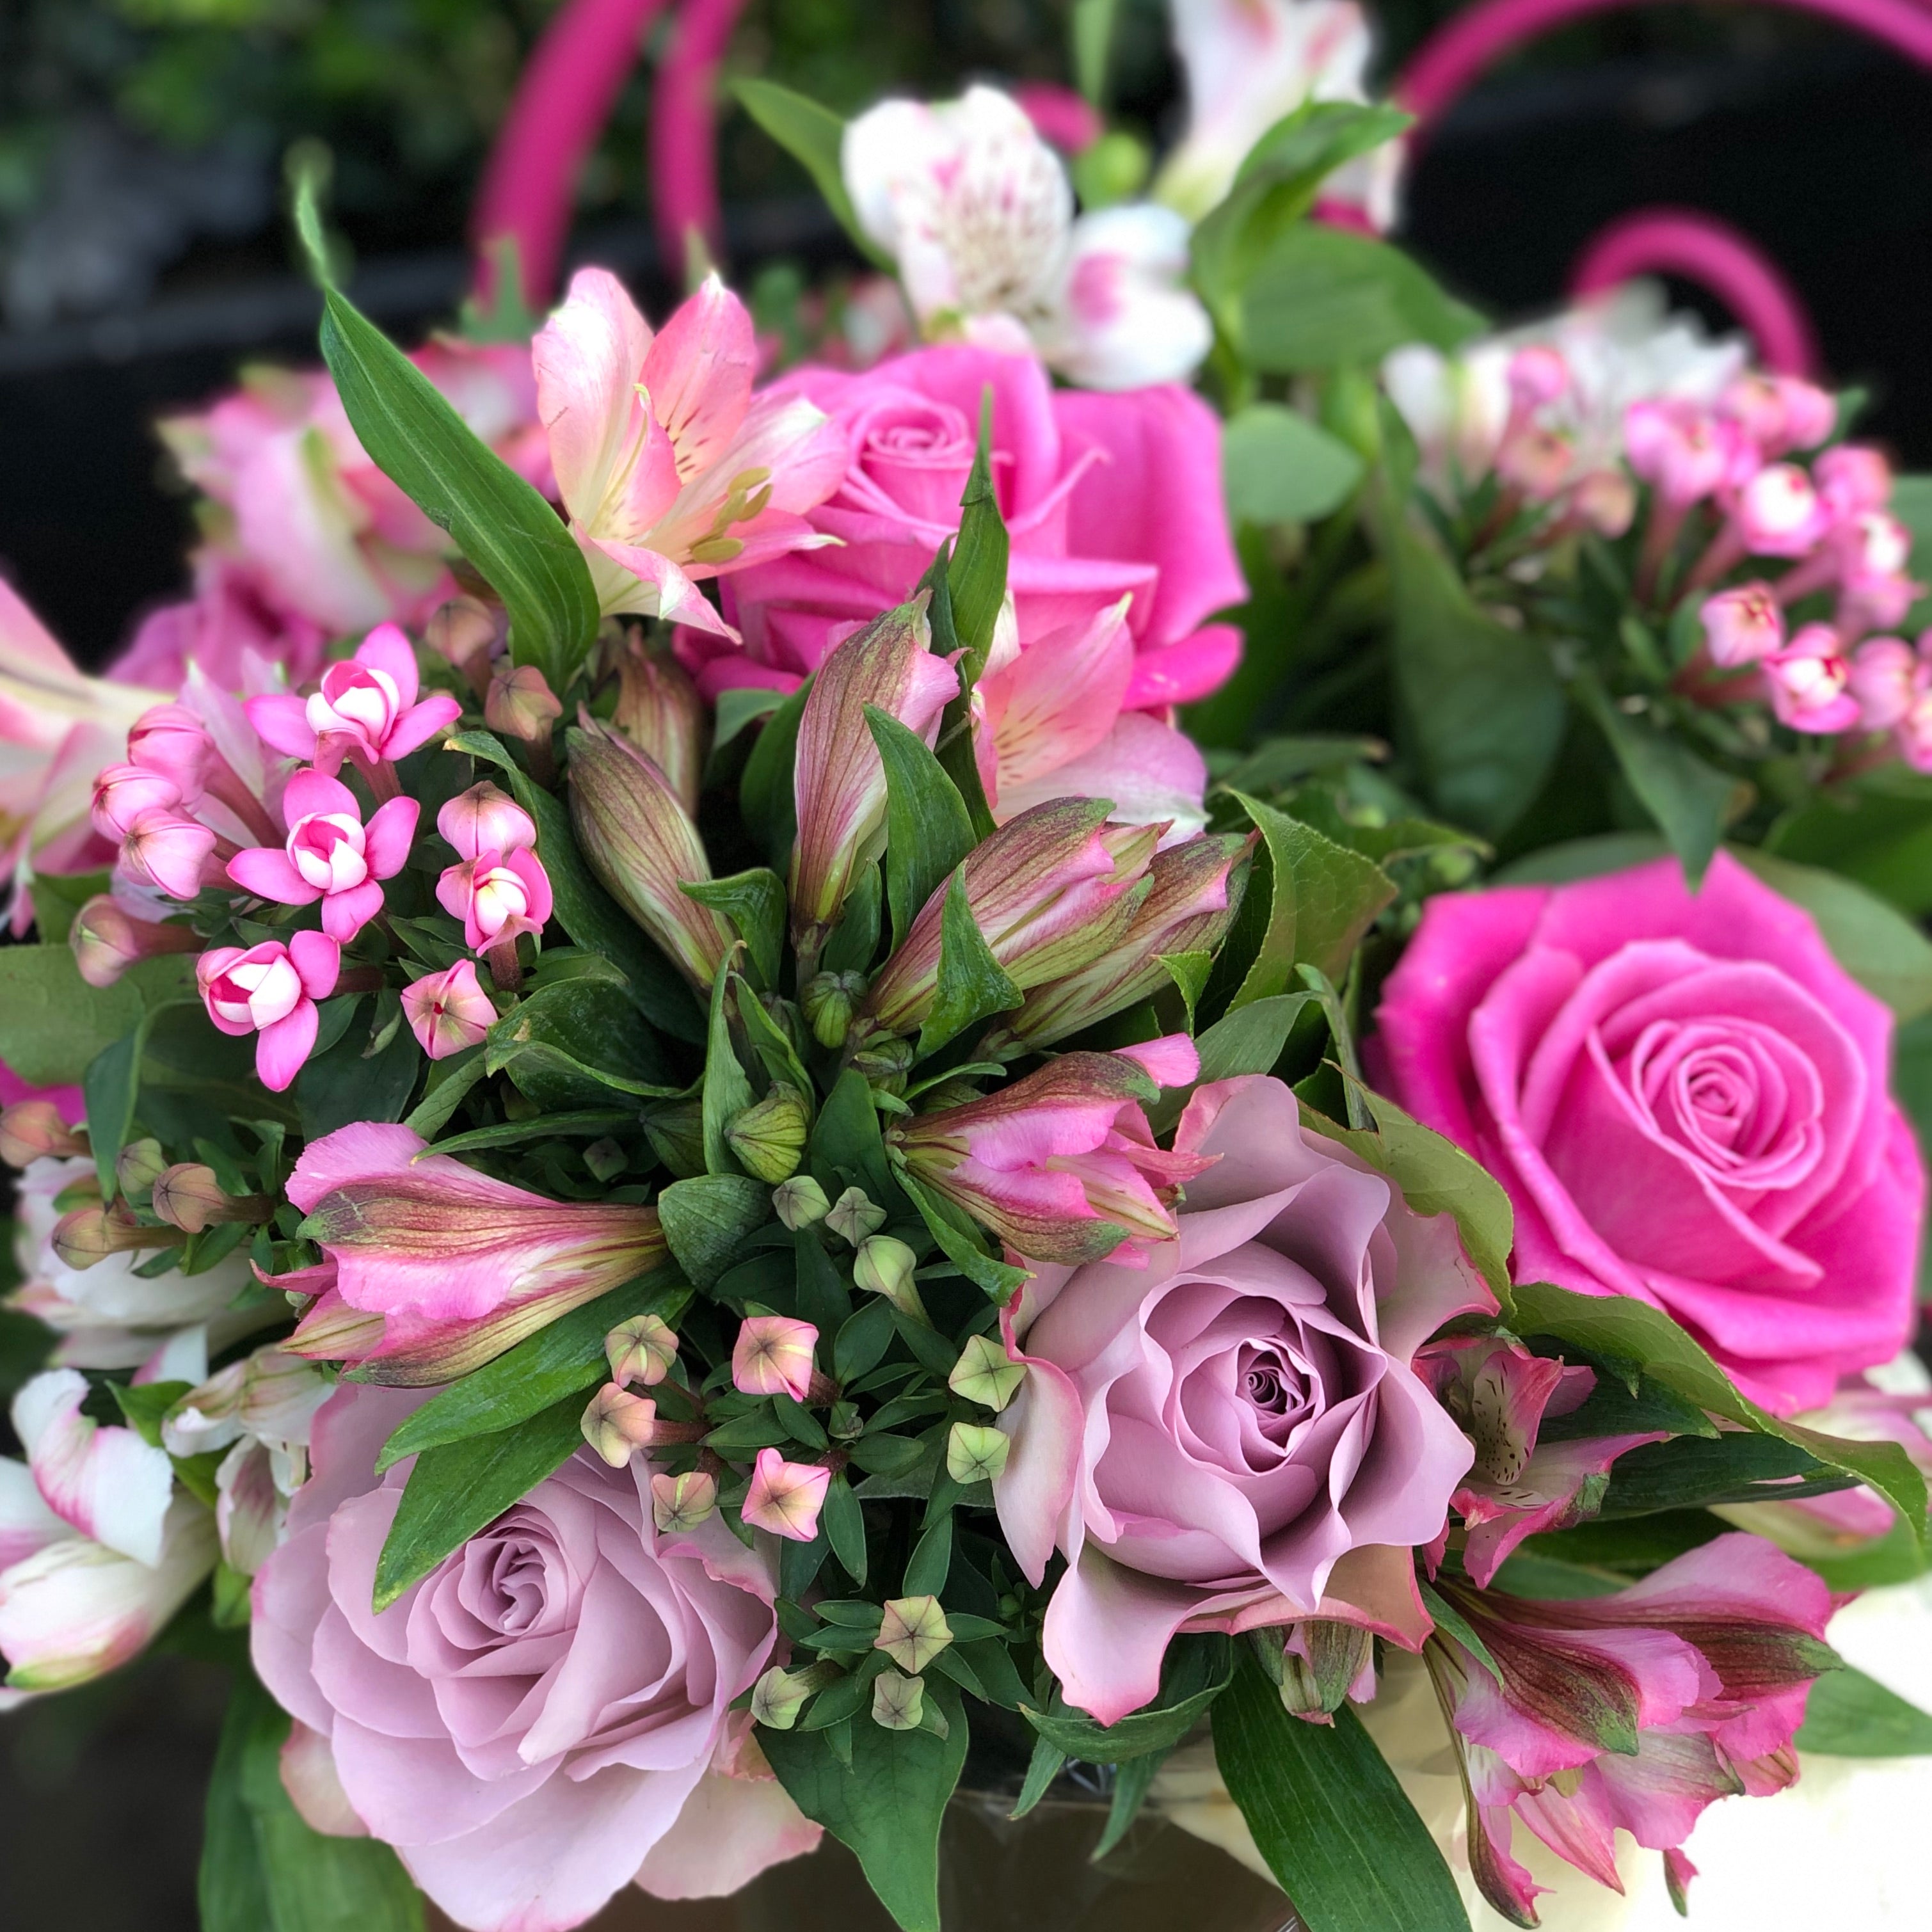 A hand-tied bouquet of dusky and rich pink roses, pink bouvardia and alstromeria flowers, which is presented in an aqua-packed gift bag with tissue paper.